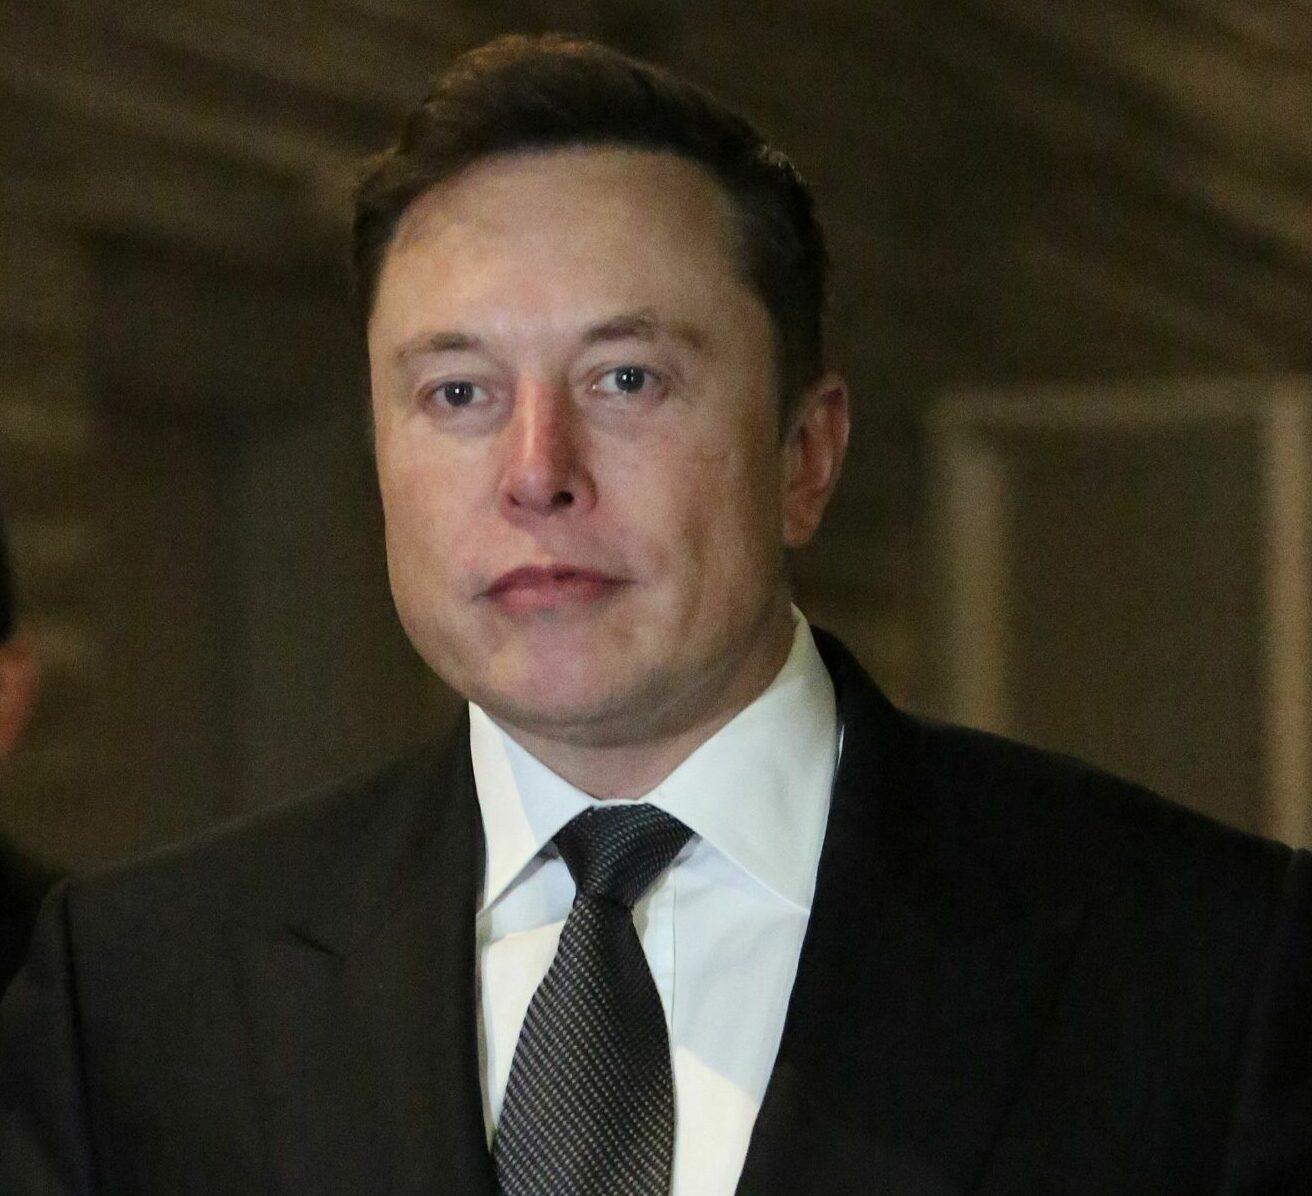 Elon Musk seen leaving Federal court in Los Angeles, Elon Musk Takes the Stand in Lawsuit Accusing Him of Defamation Over ‘Pedo’ Tweet.